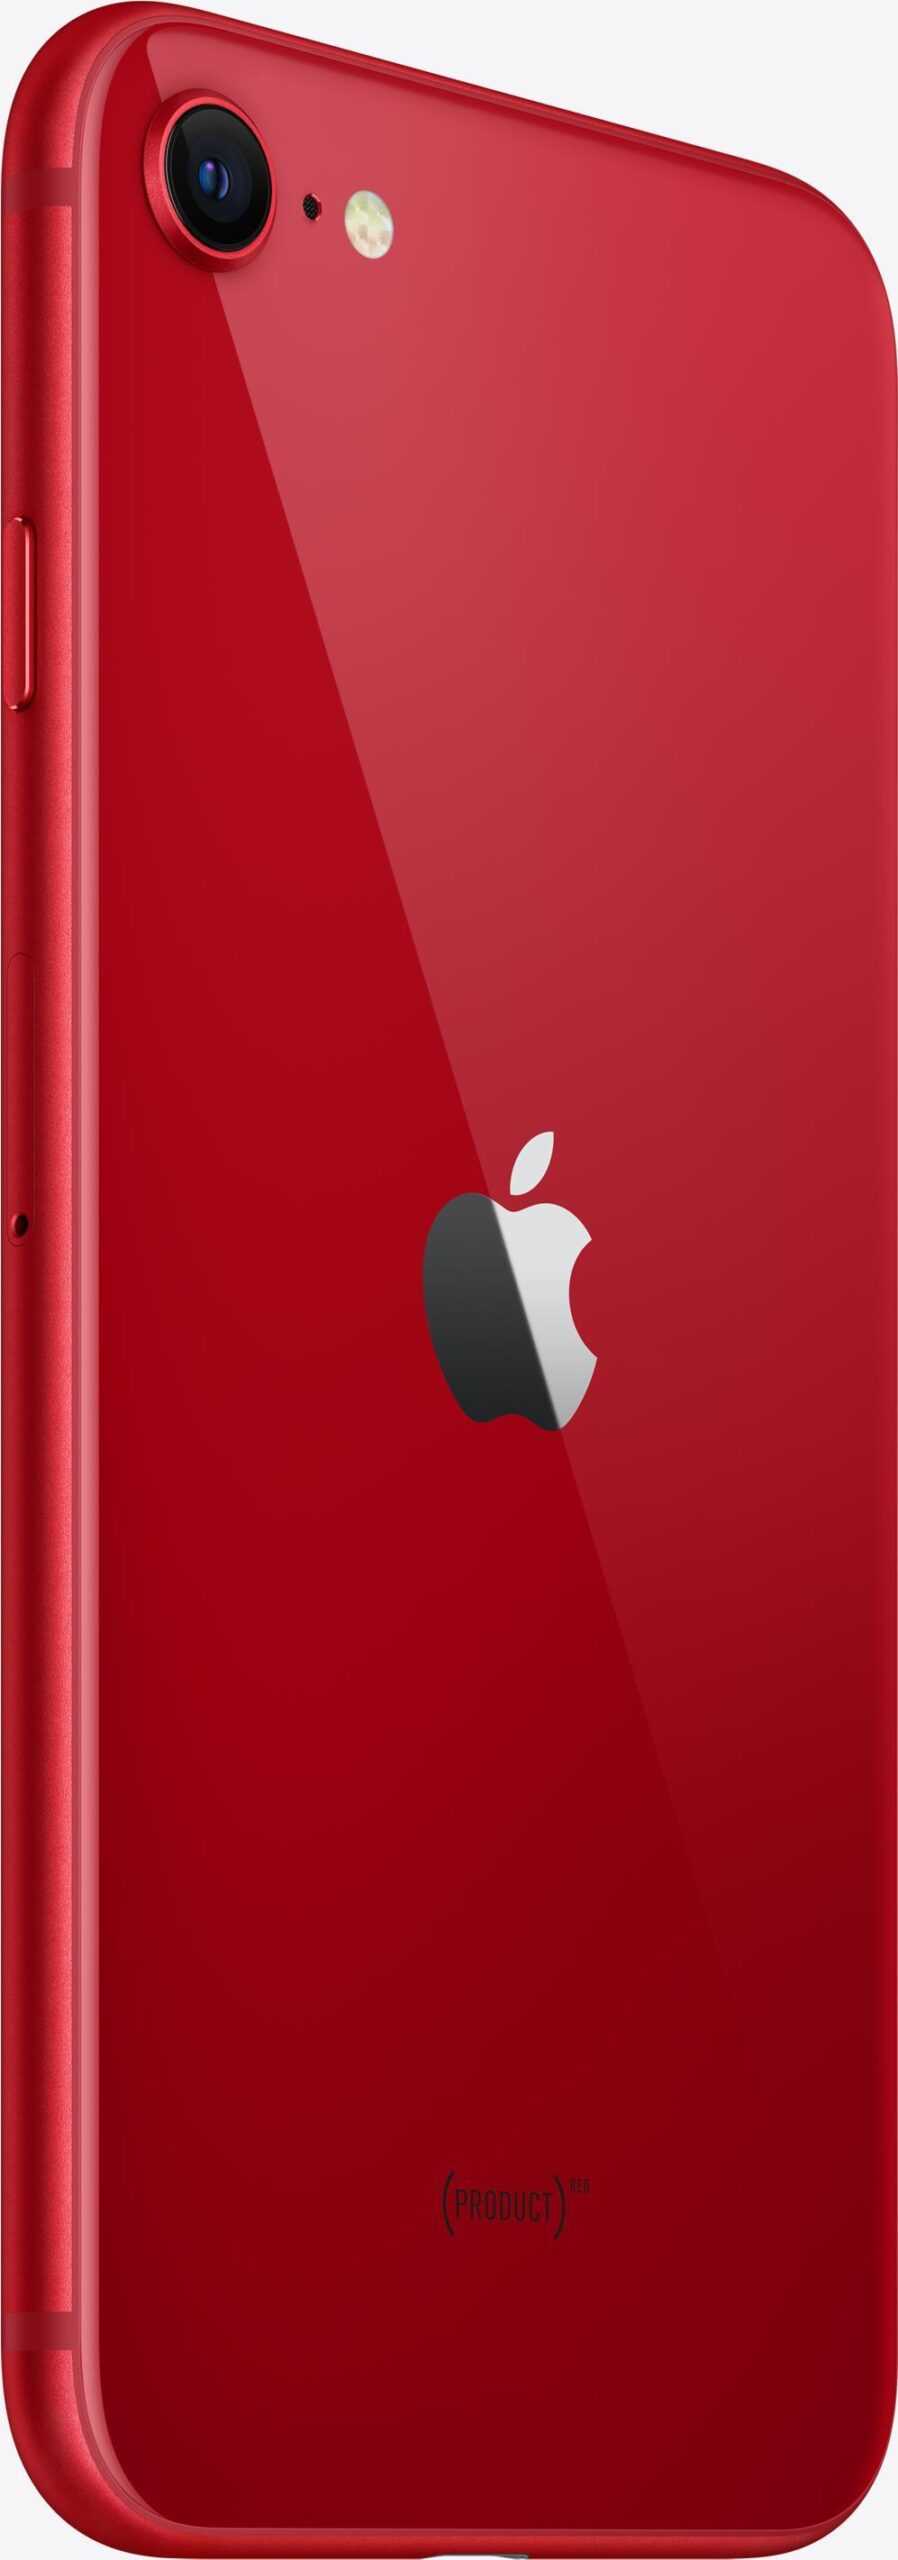 Apple iPhone SE (3rd generation) - (PRODUCT) RED - 5G Smartphone - Dual-SIM - 128GB - LCD-Anzeige - 4.7 - 1334 x 750 Pixel - rear camera 12 MP - front camera 7 MP - Rot (MMXL3ZD/A)